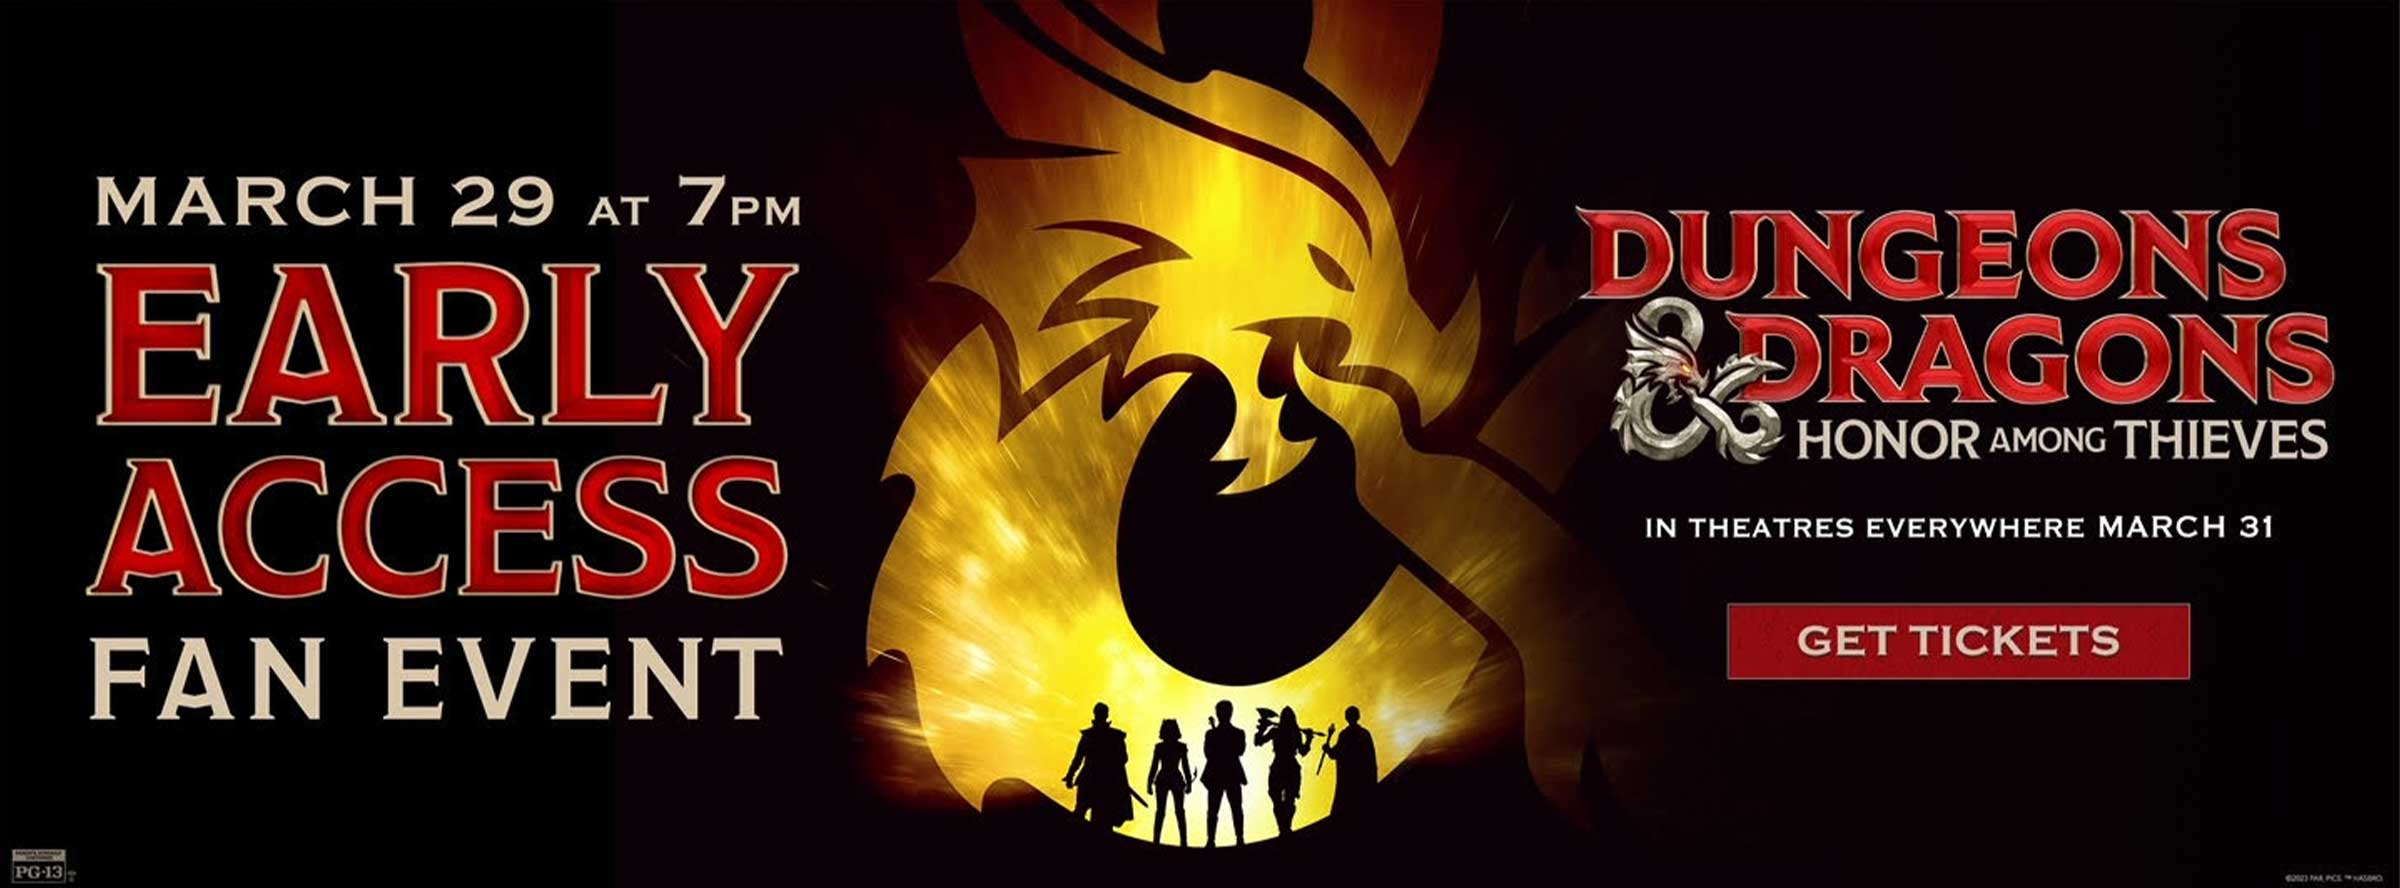 Slider Image for Dungeons & Dragons: Honor Among Thieves Early Acce